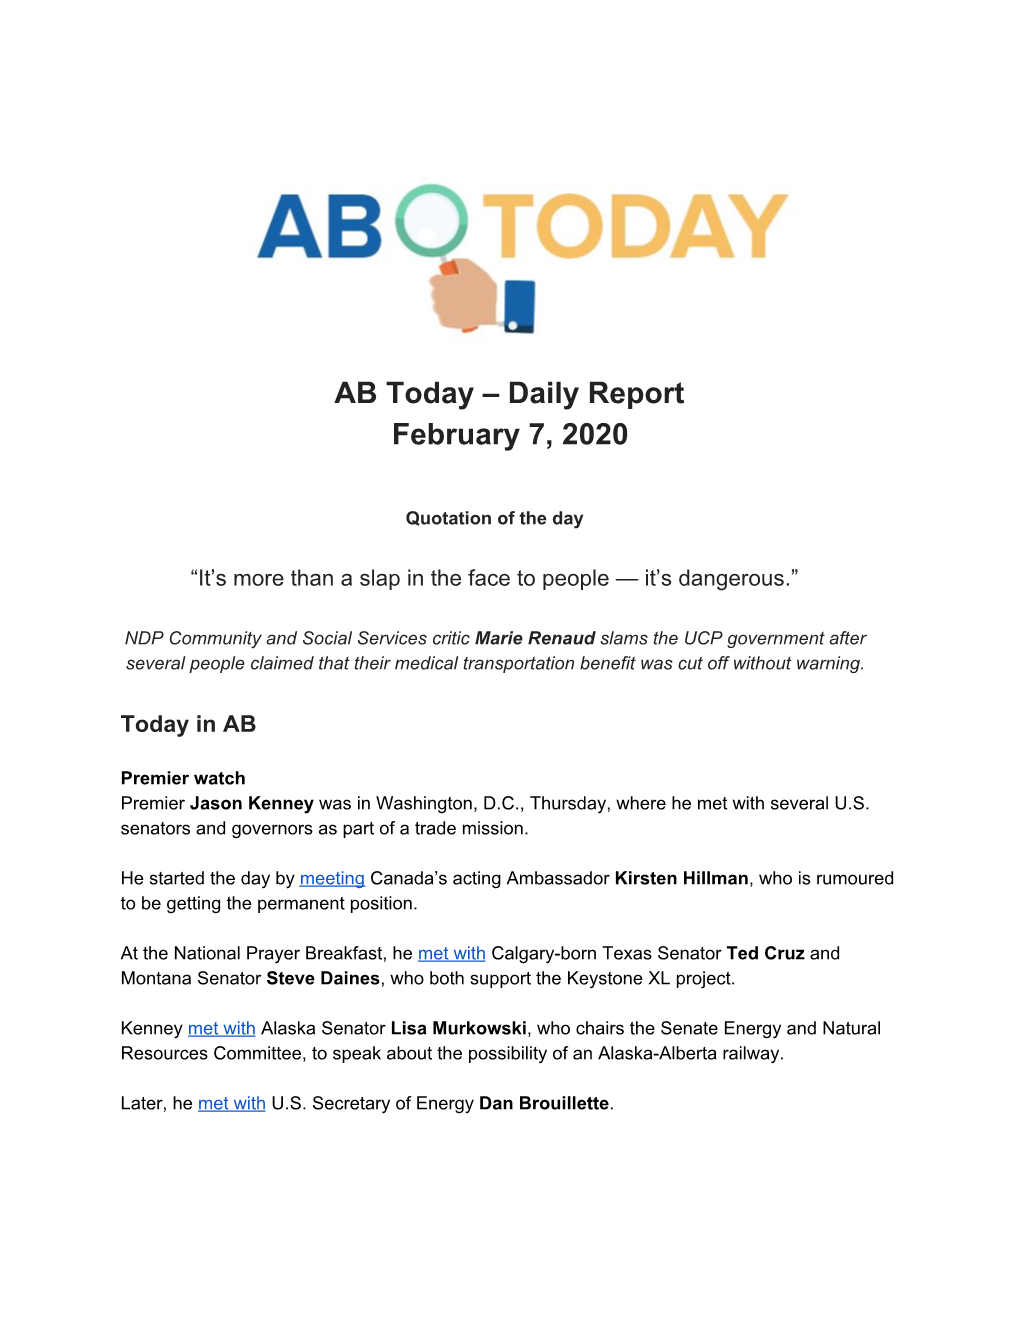 AB Today – Daily Report February 7, 2020